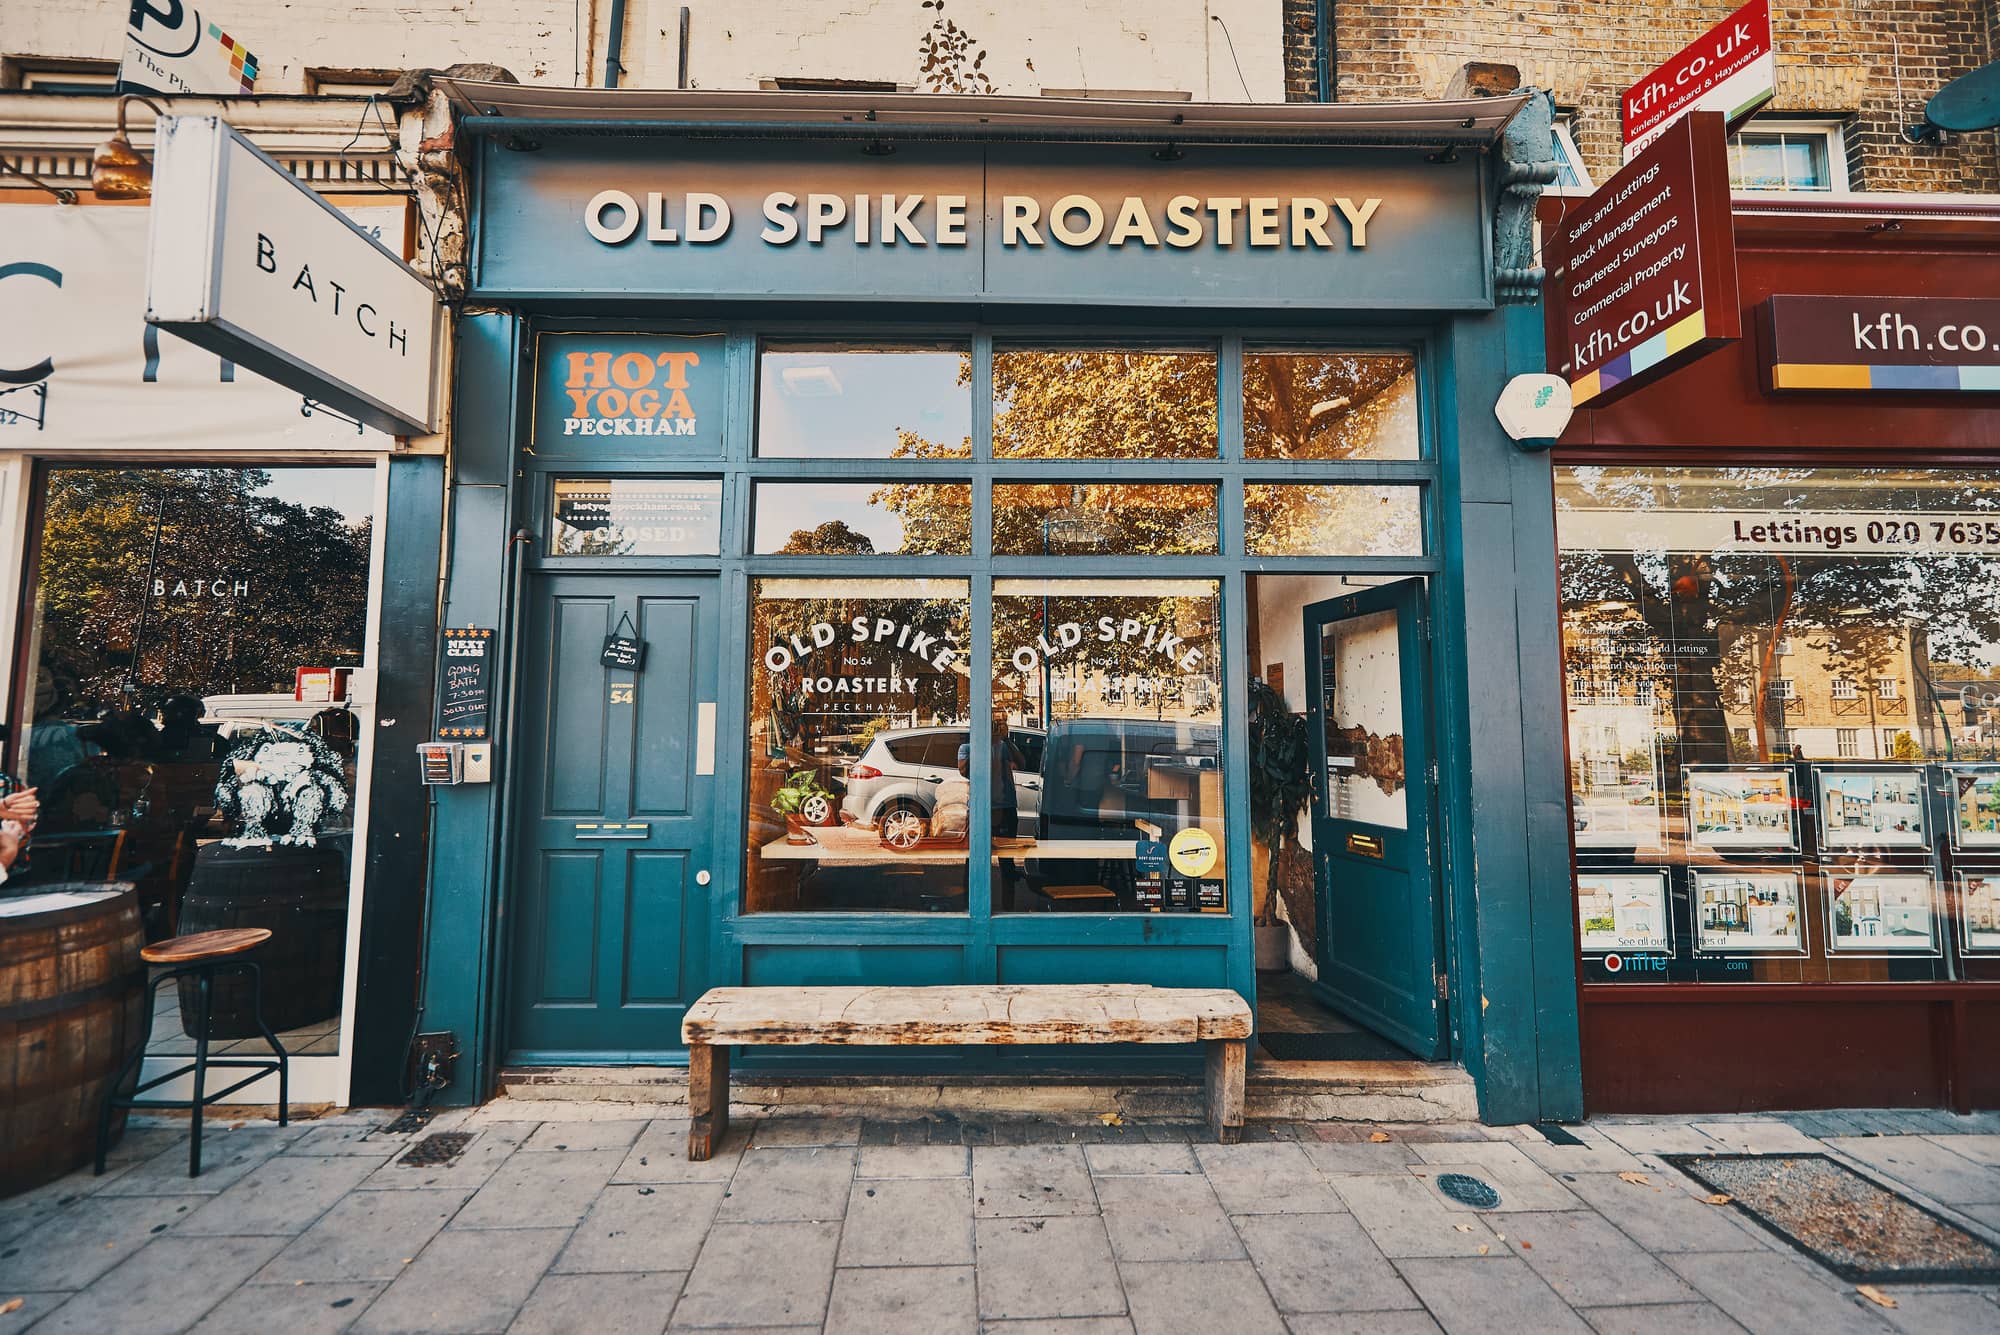 Behind the brand – Old Spike Roastery